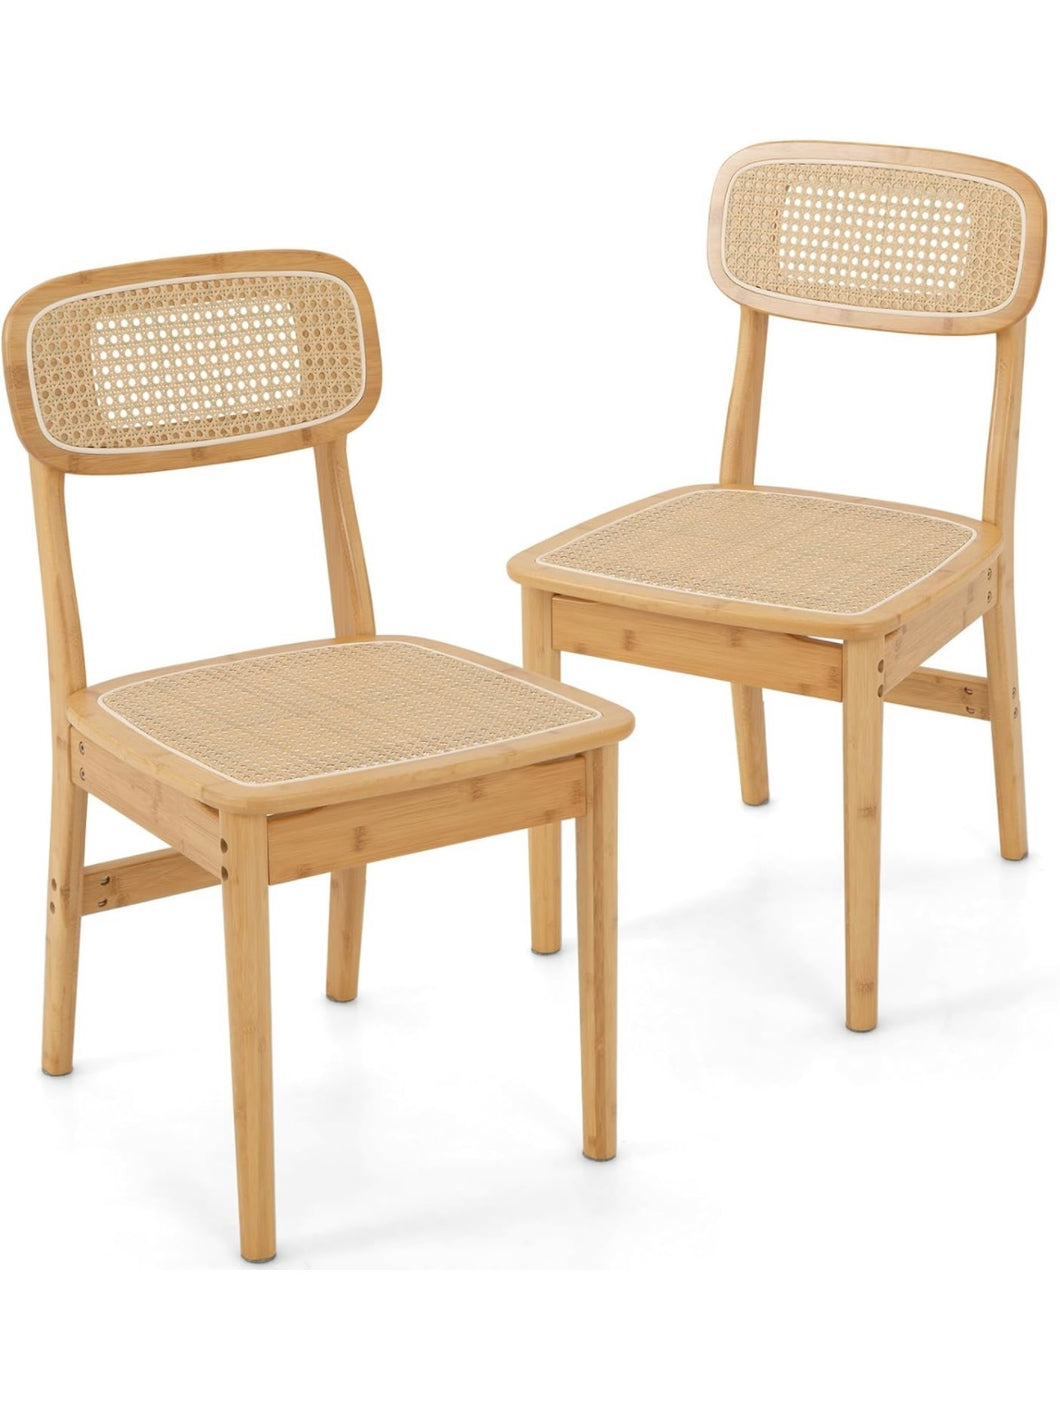 Bamboo Rattan Chair set of 2